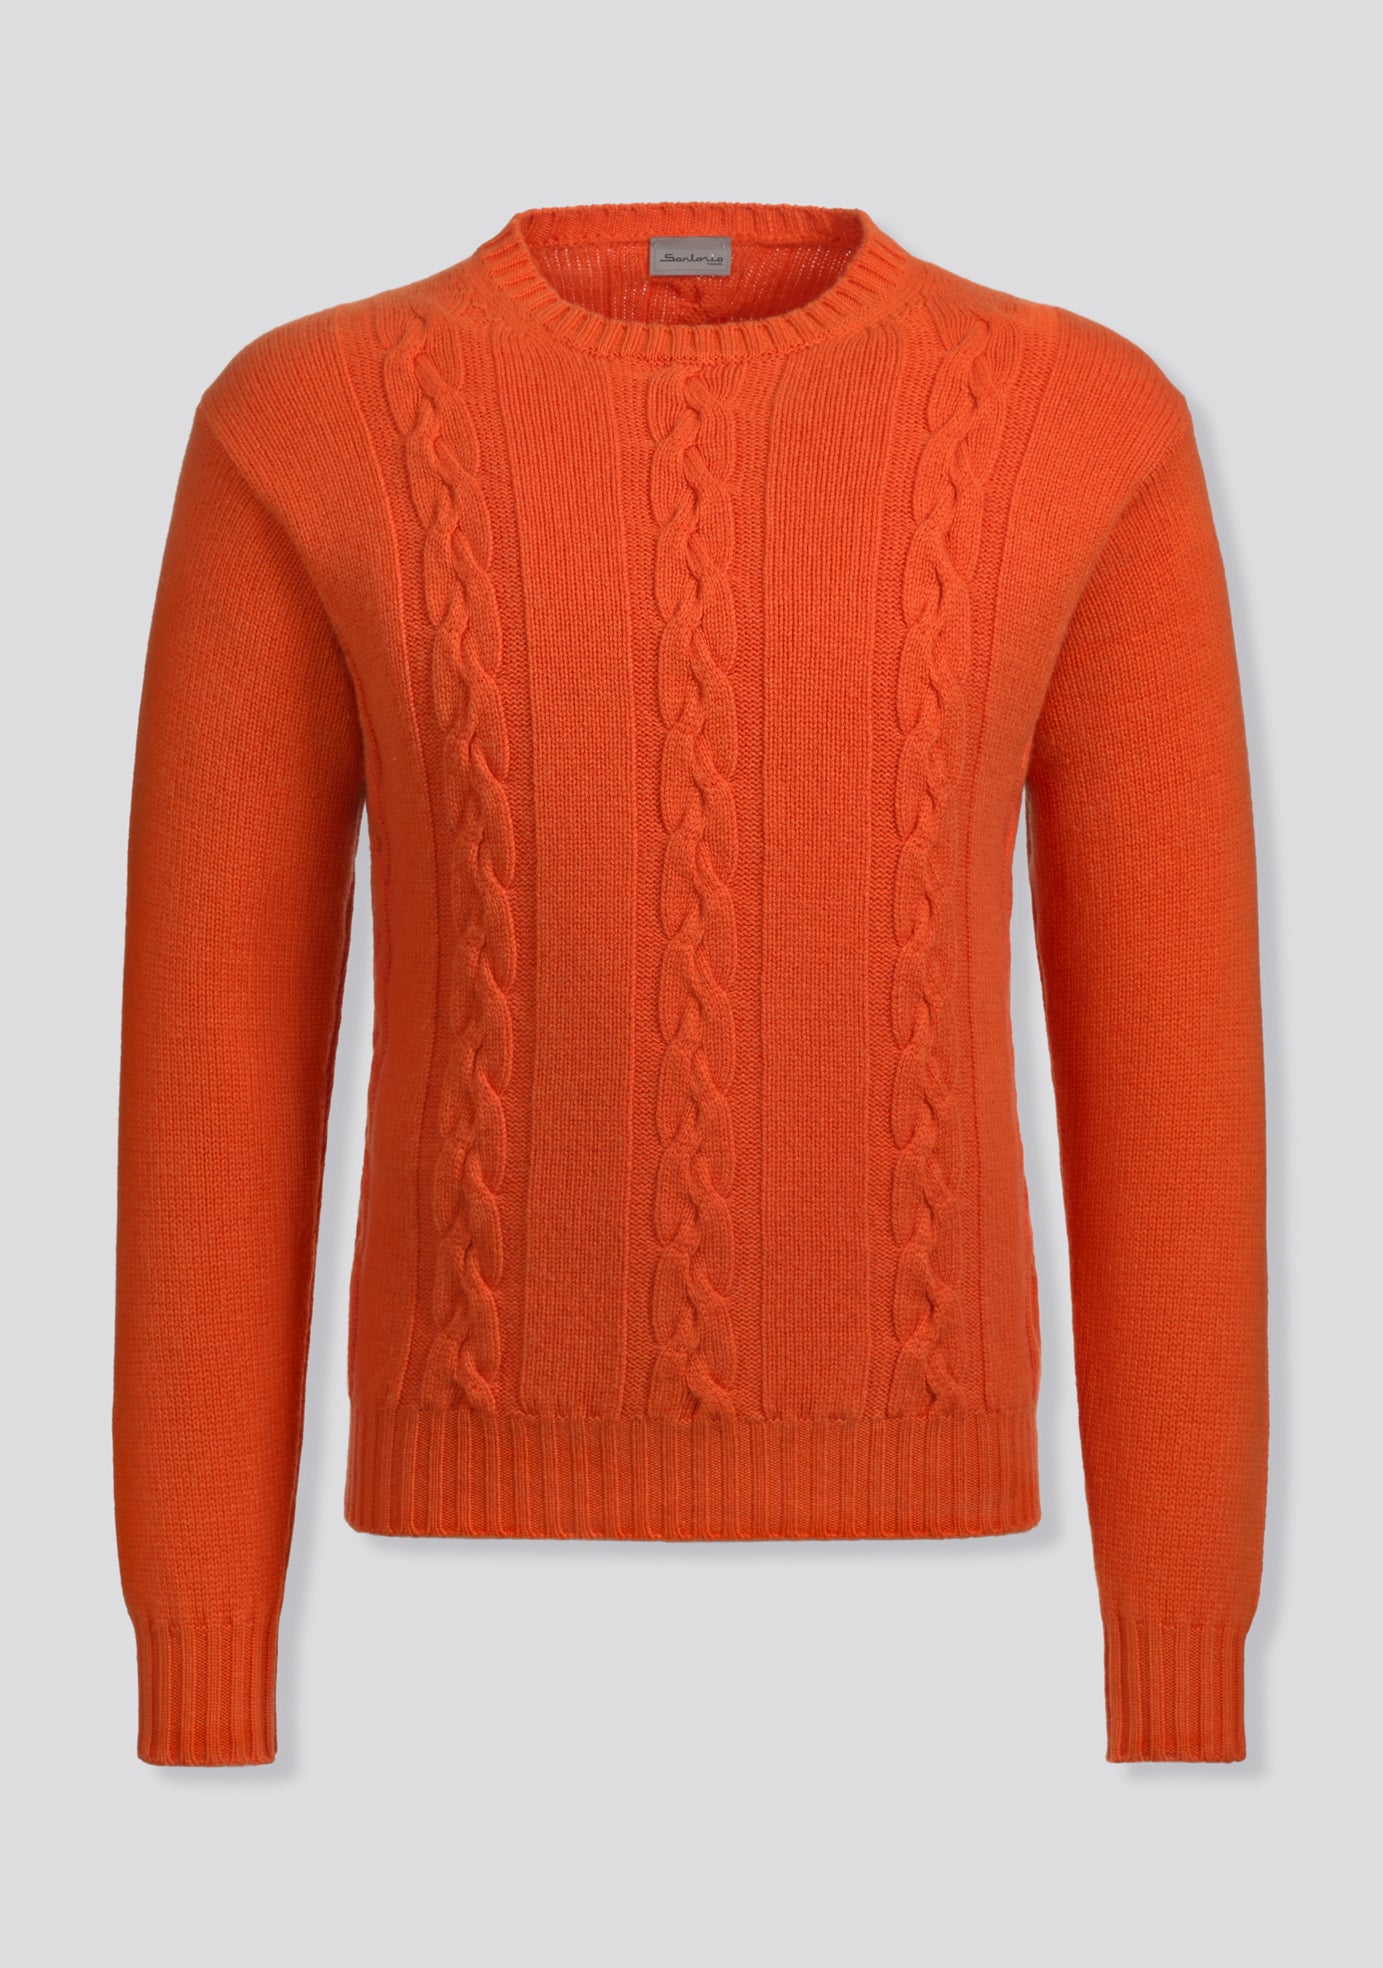 Orange Crew-neck Sweater in Cashmere and Lana Wool